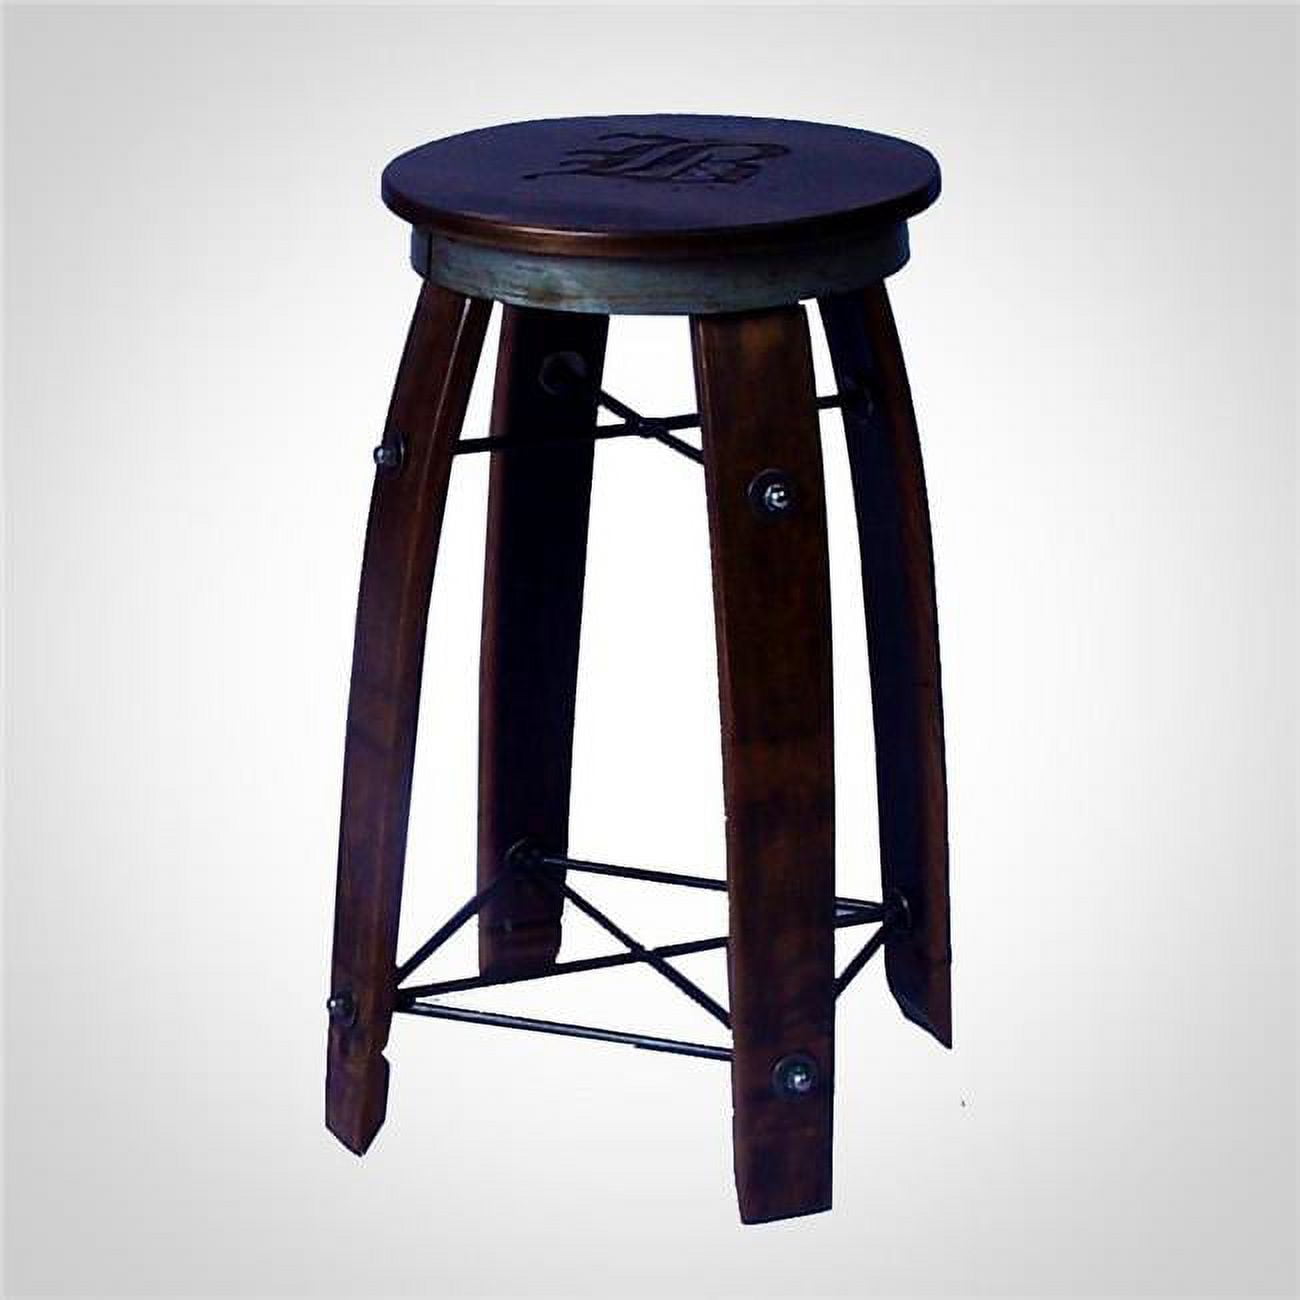 Picture of 2 Day Designs 197-24 24 in. Daisy Stave Stool